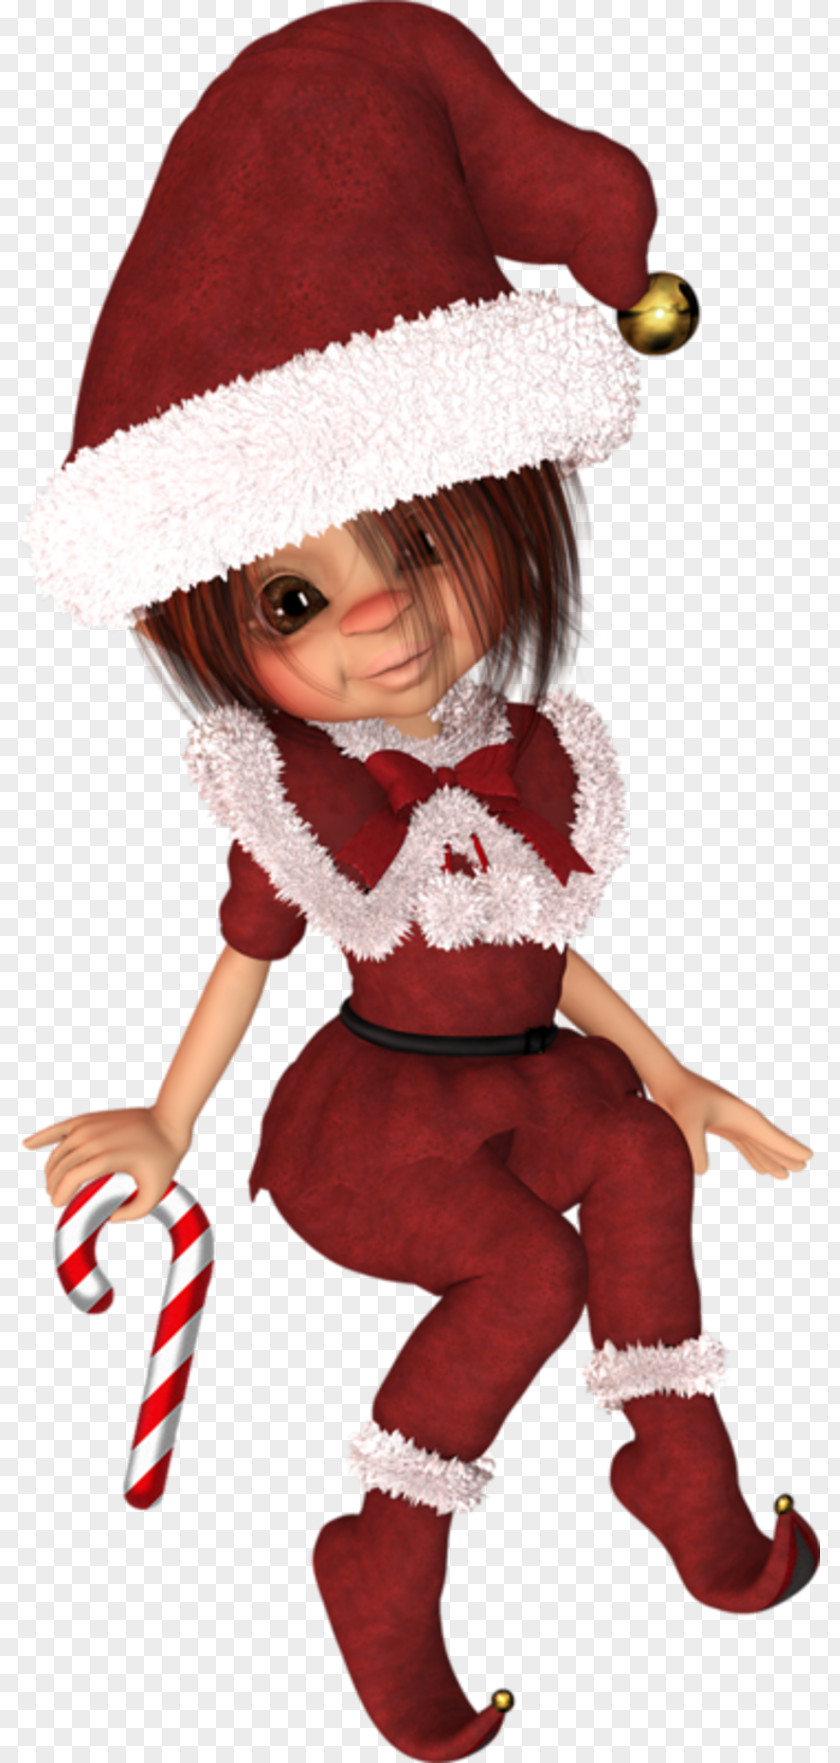 Santa Claus Christmas Ornament Doll Cookie PNG